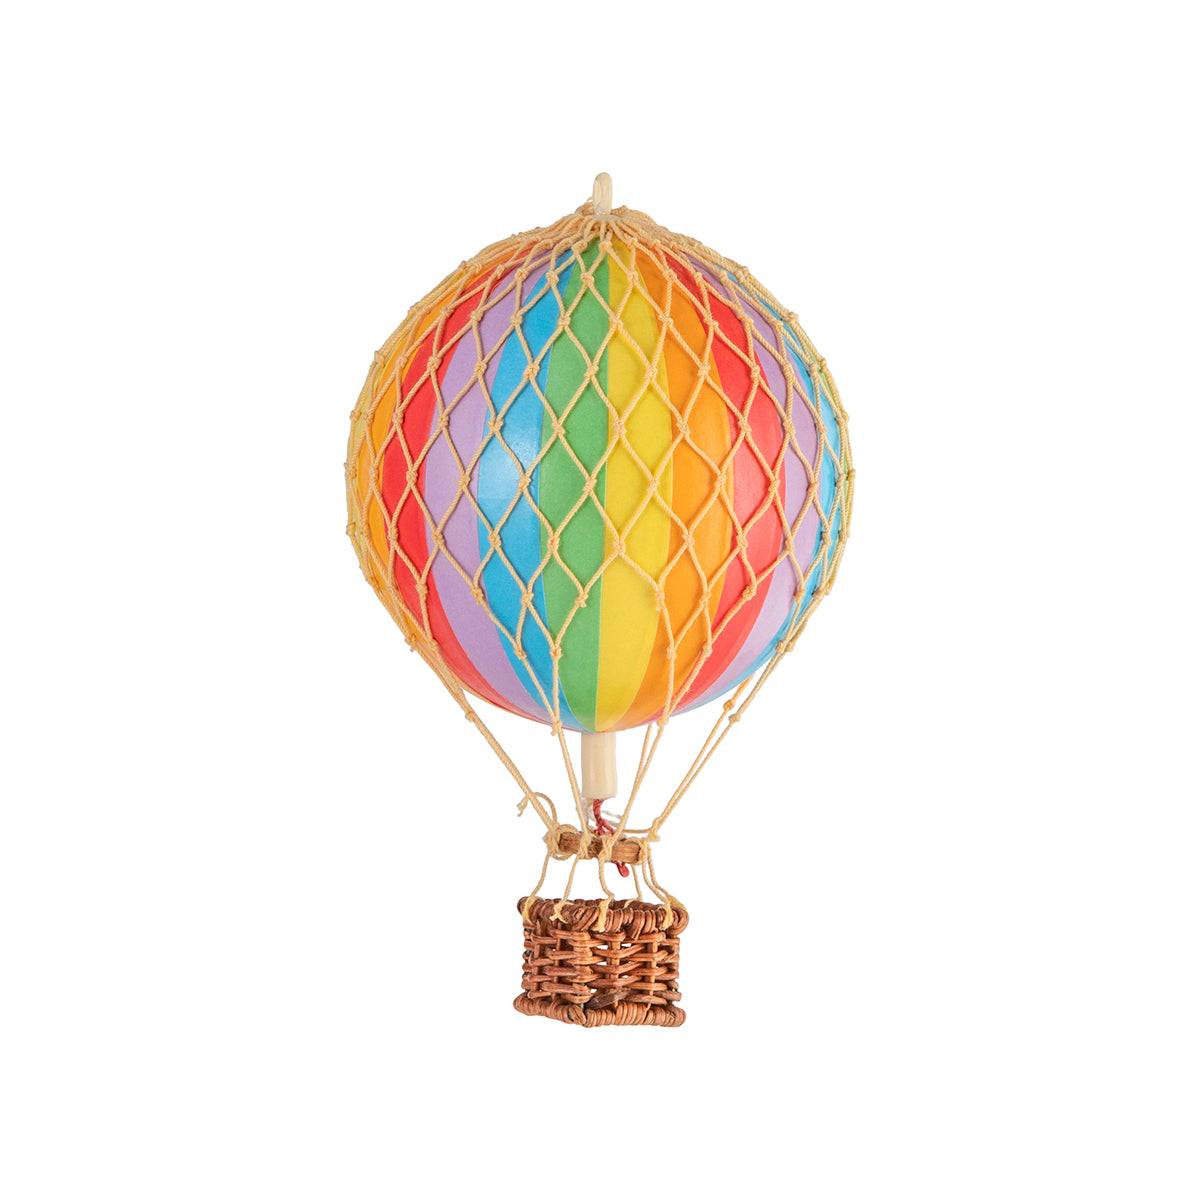 A Wonderen Extra Small Hot Air Balloon - Floating The Skies, made by Wonderen Stroopwafels, magically floats over a white background, promising an adventure-filled experience.